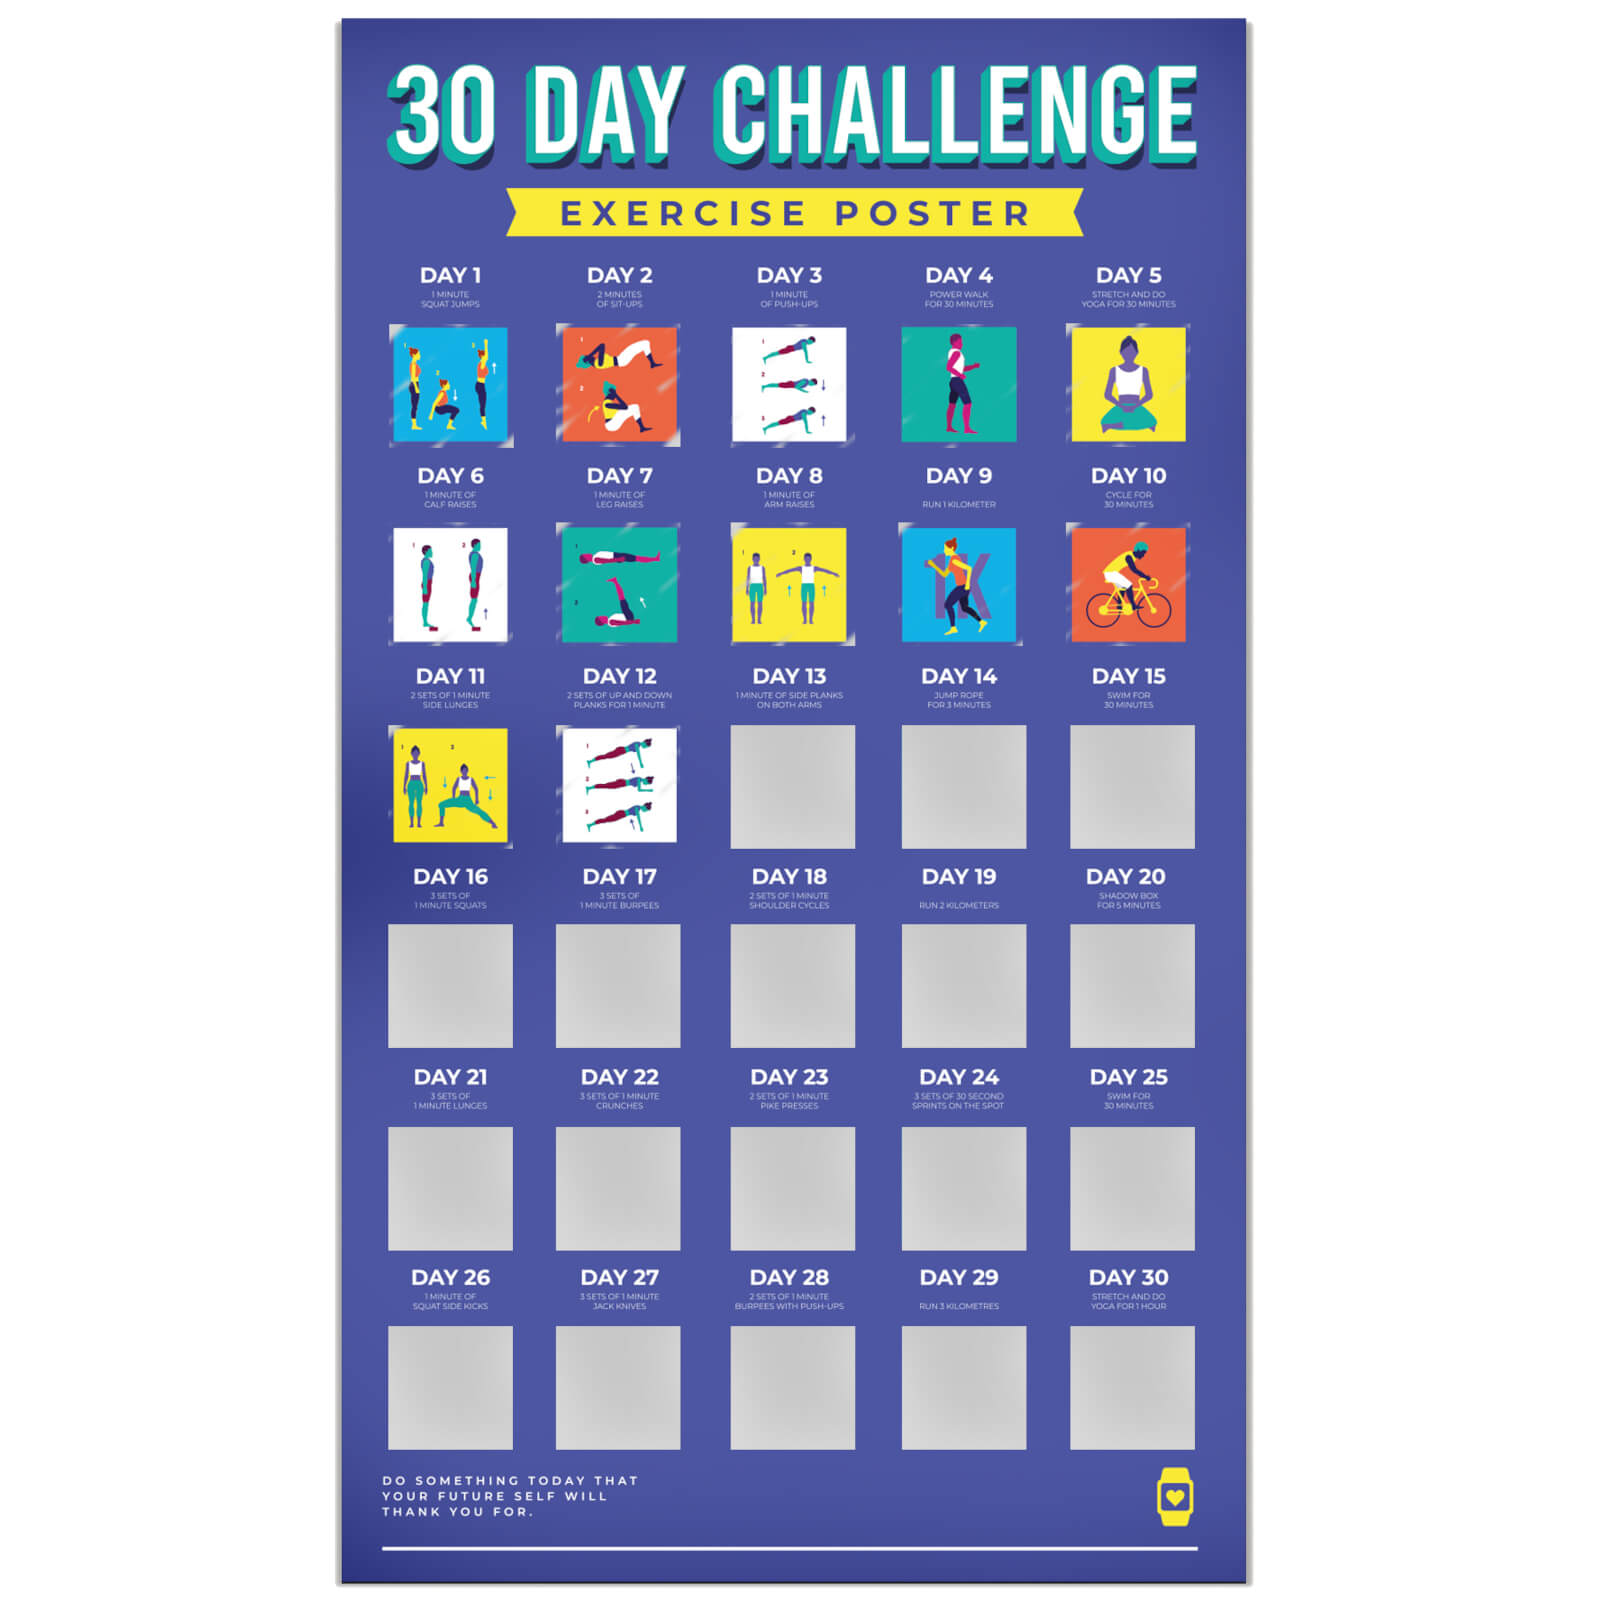 30 Day Challenge Posters - Exercise